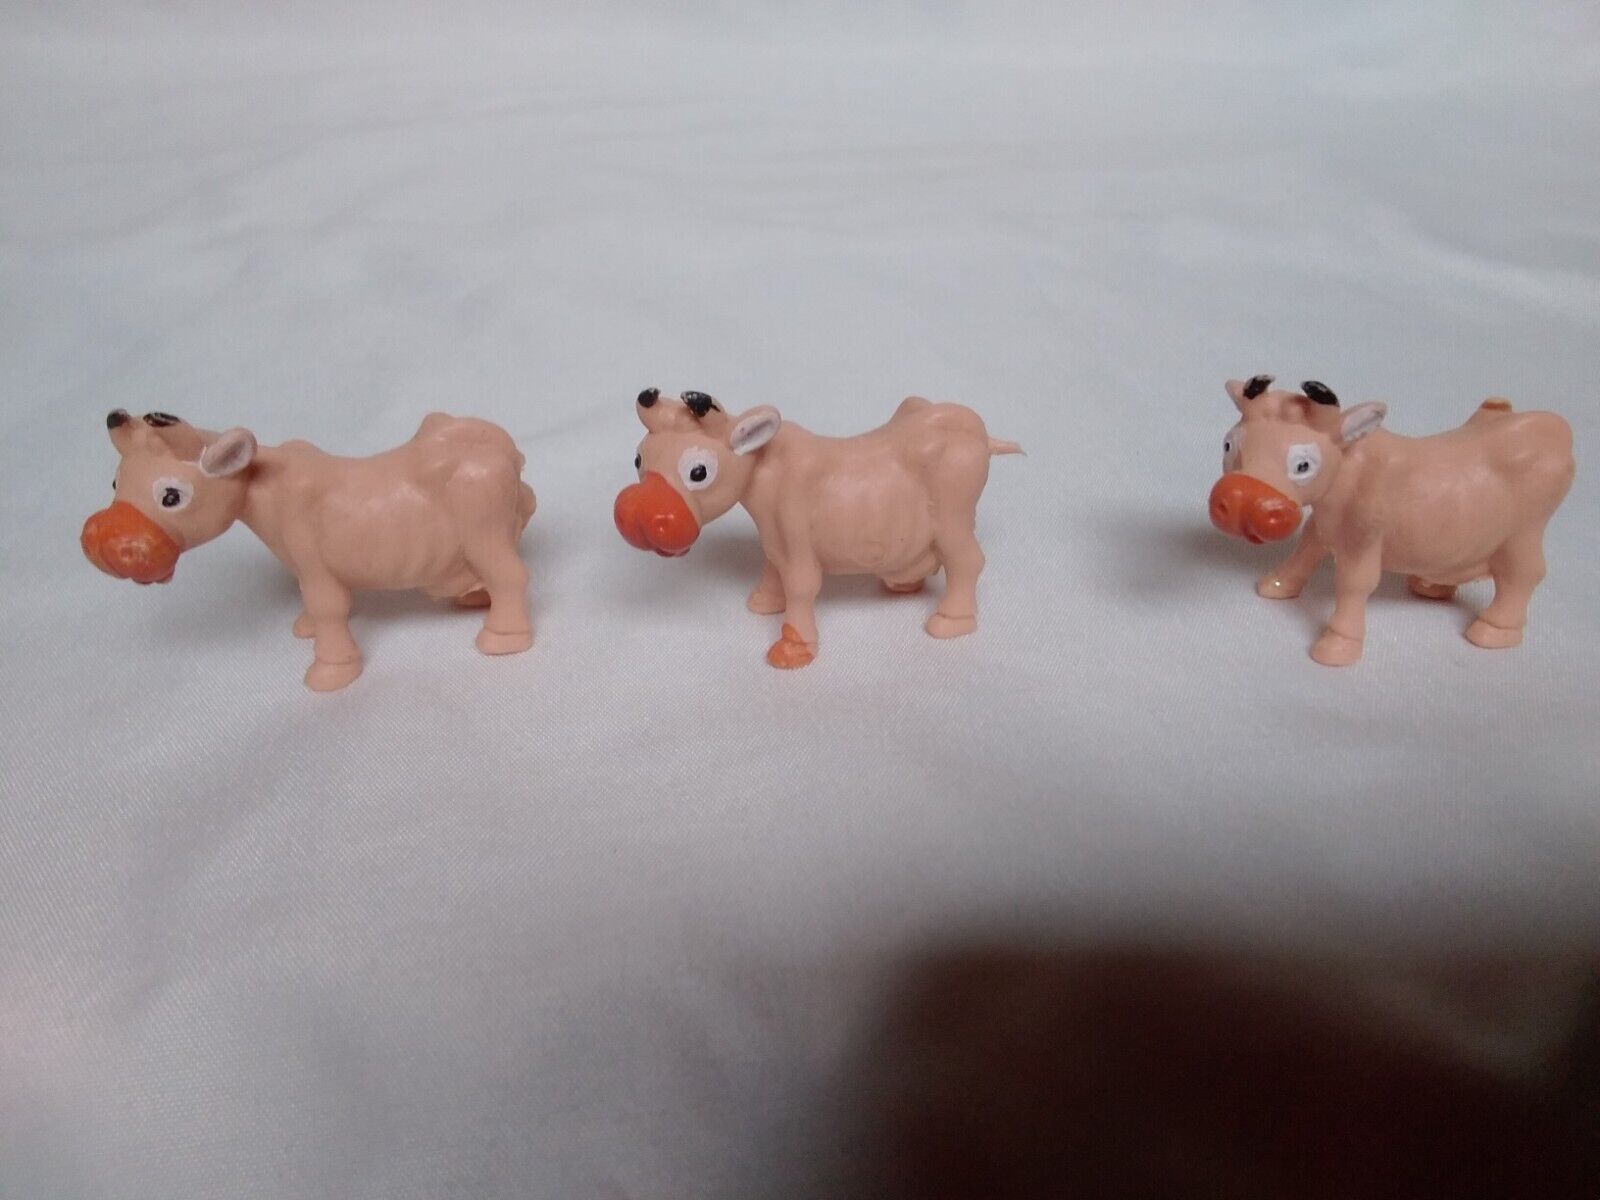 VTG (3) BABY DAIRY COWS TOY/FIGURINE/DECOR/COLECTIBLES MADE IN HONG KONG (RARE)